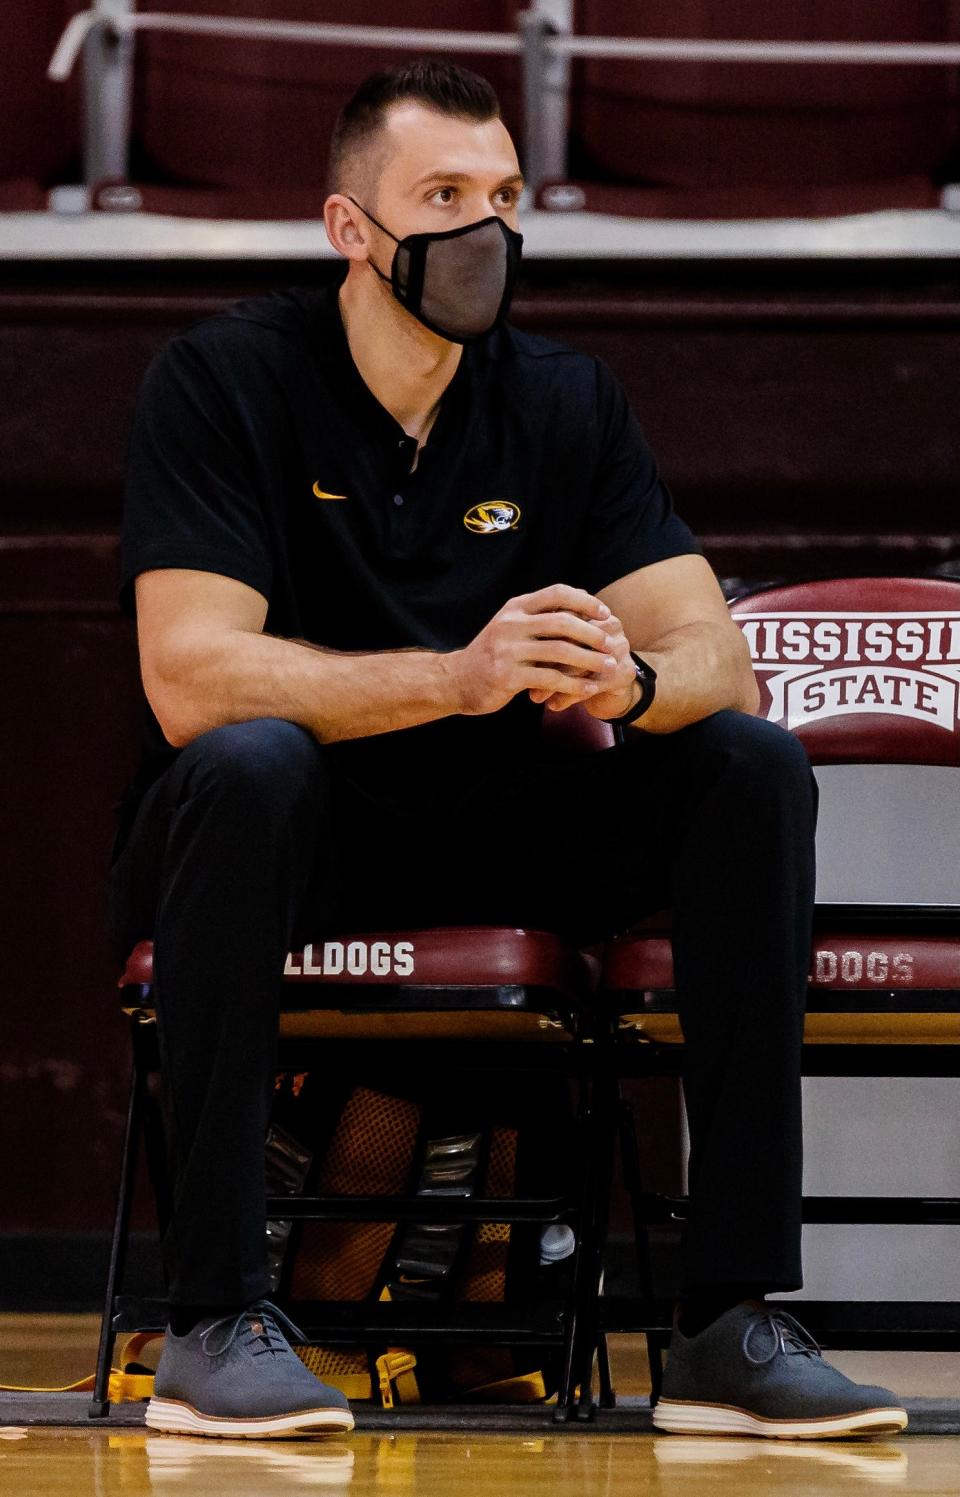 Missouri coach Joshua Taylor watches during a match against Mississippi State on March 24 at the Newell-Grissom Building in Starkville, Miss.